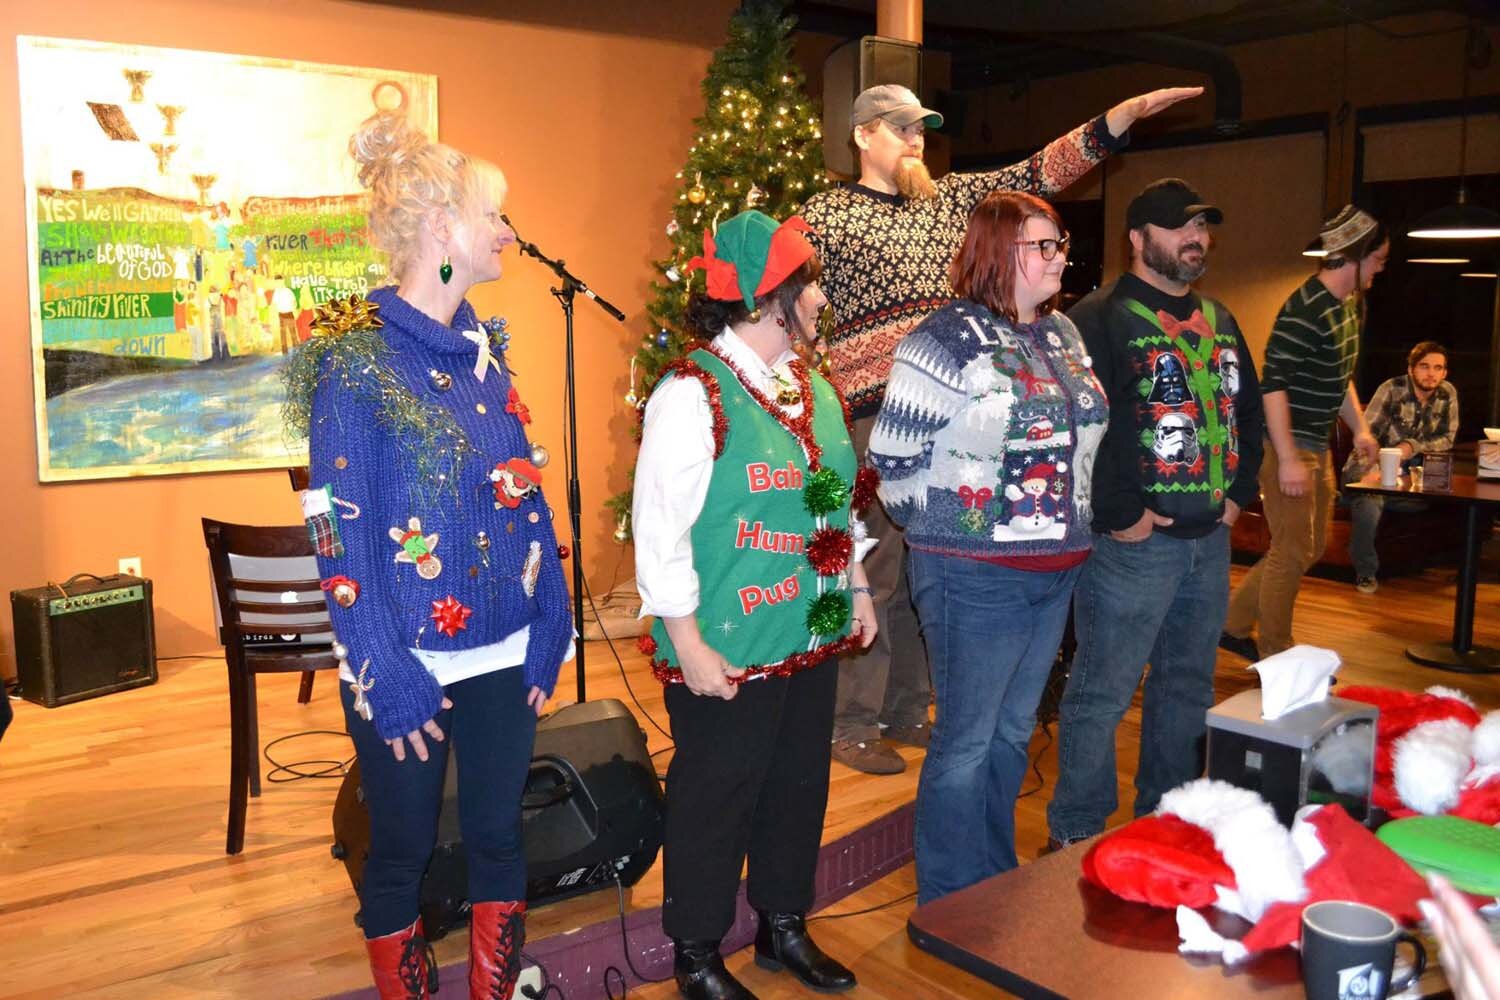 Ugly sweater finalists.